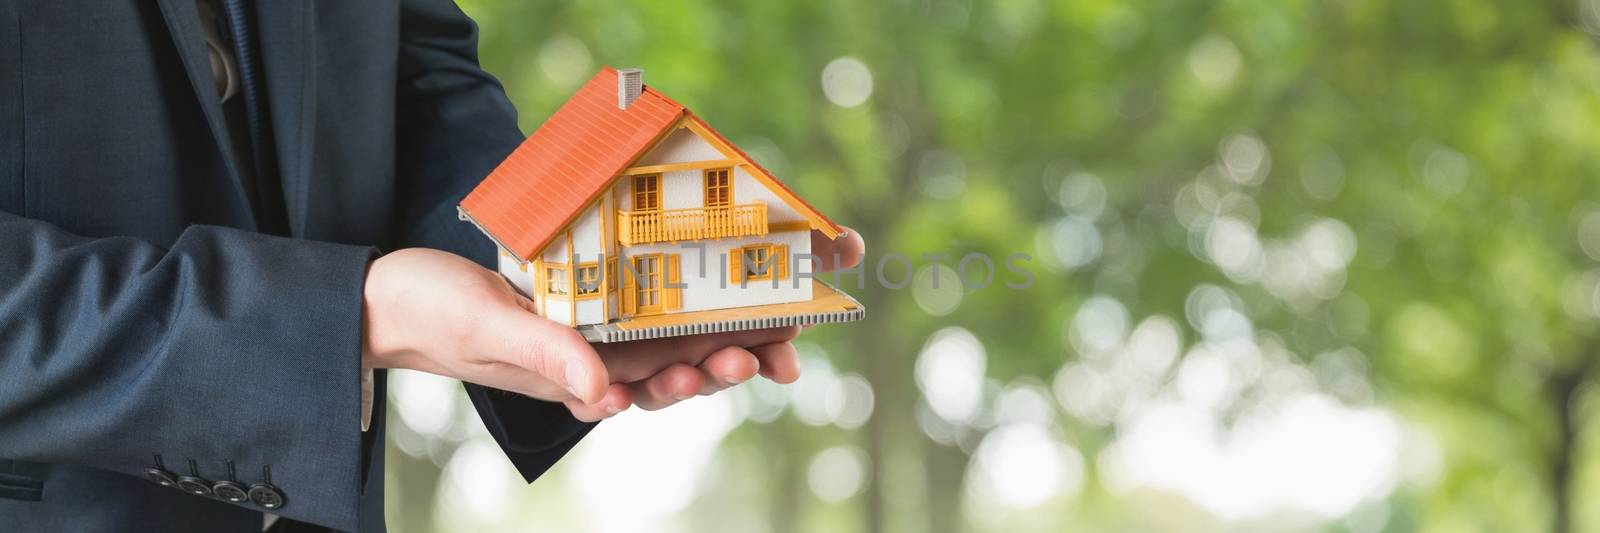 Digital composite of Man holding a house as house insurance concept